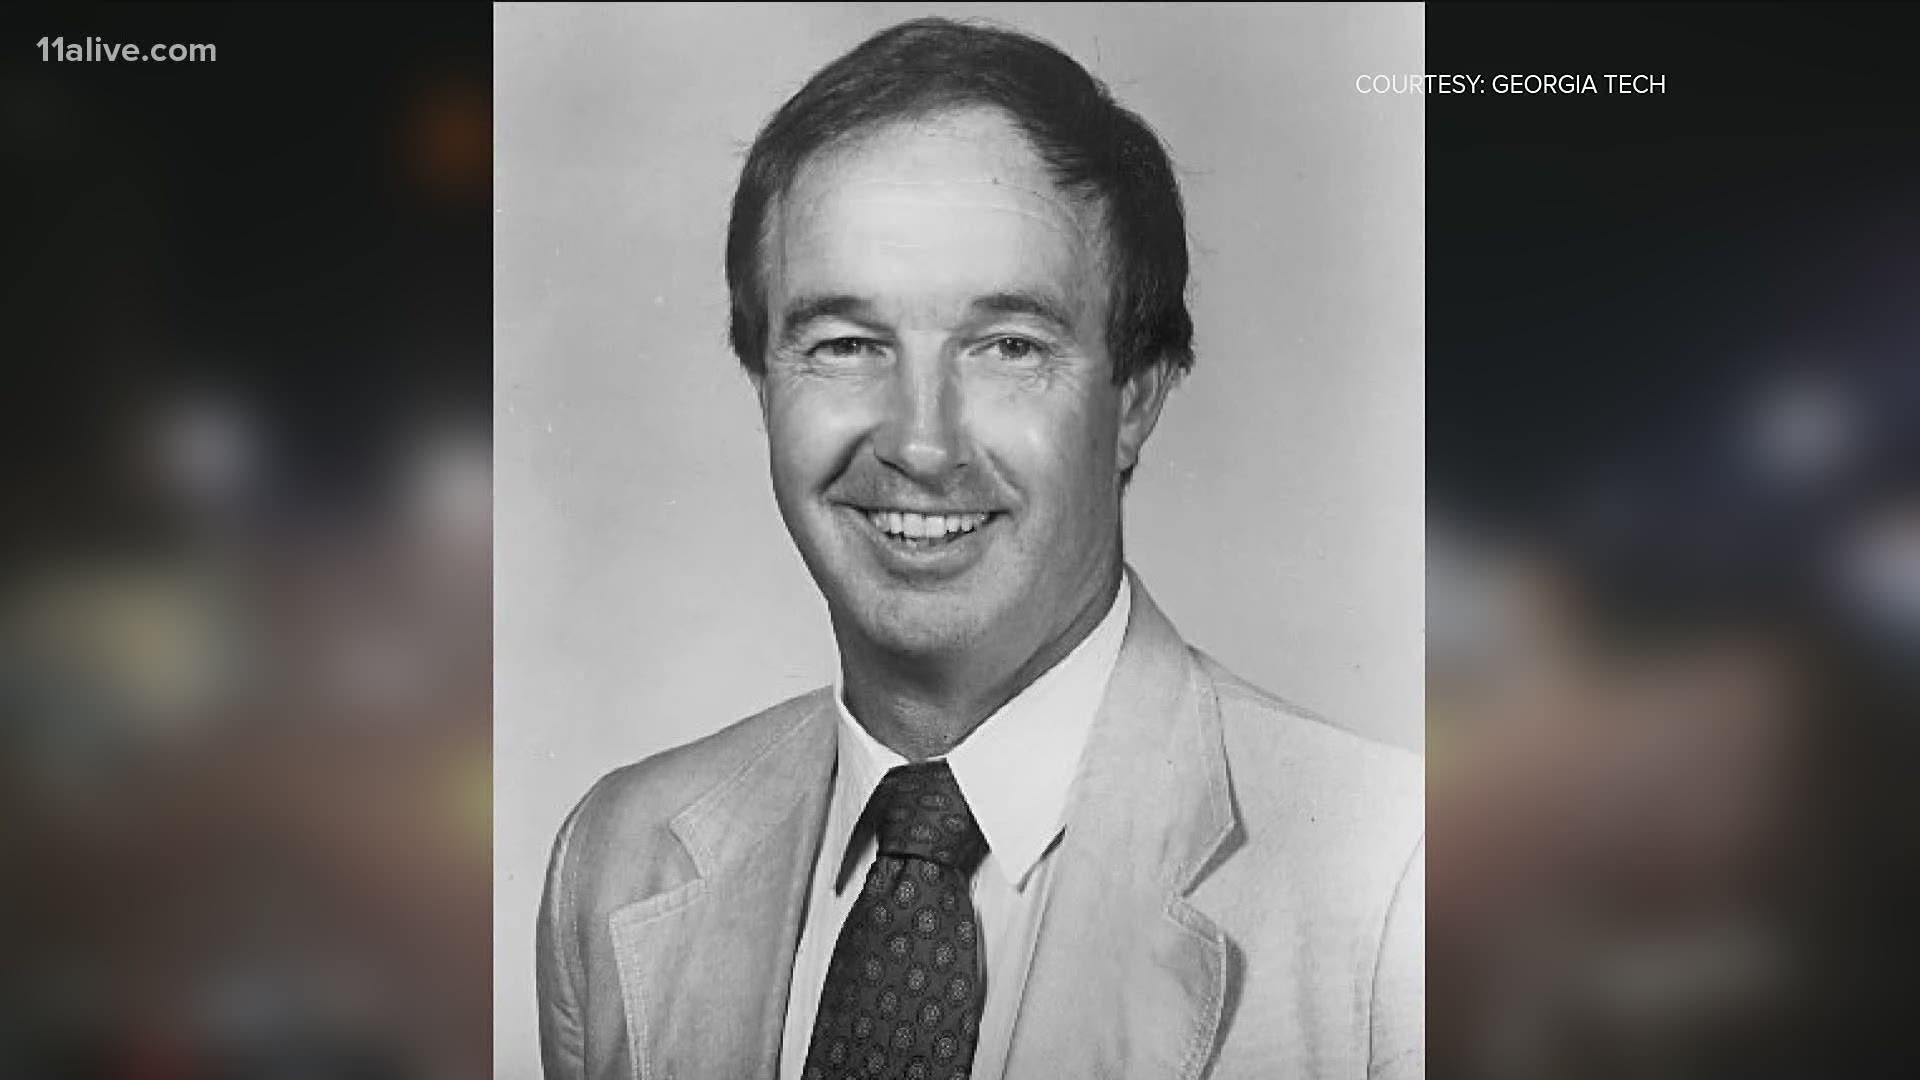 He paved the way for big payouts today, after he sued Georgia Tech 37 years ago. He died May 14 at 88 years old.